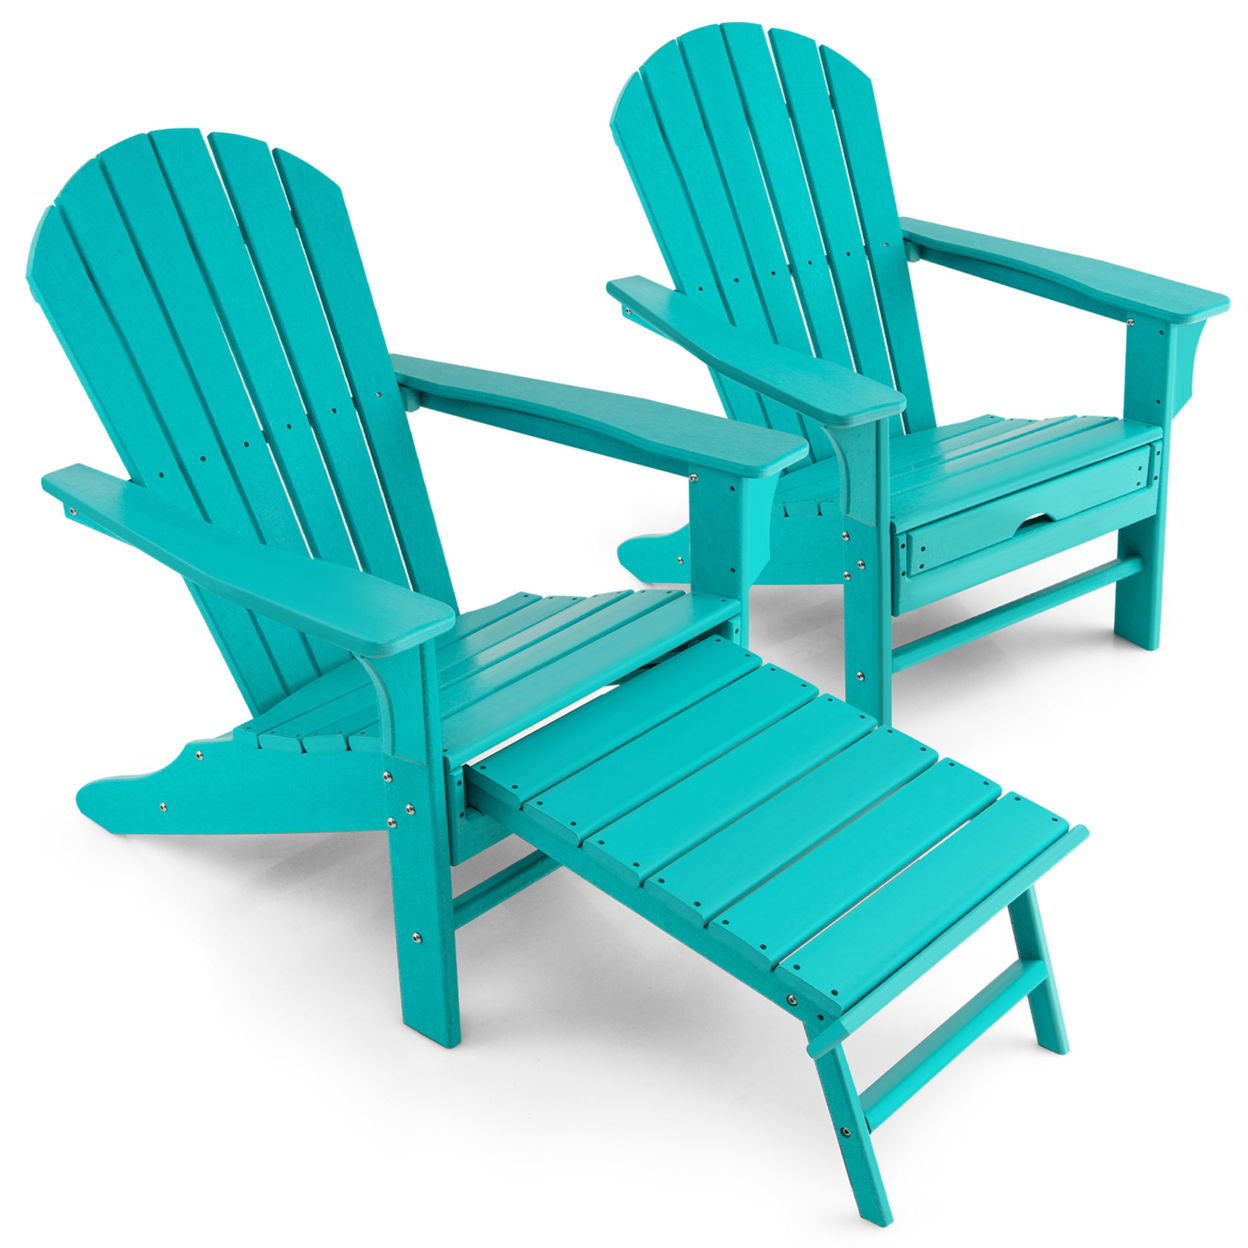 Set Of 2 Patio Adirondack Chair HDPE Outdoor Lounge Chair W/ Retractable Ottoman - Turquoise